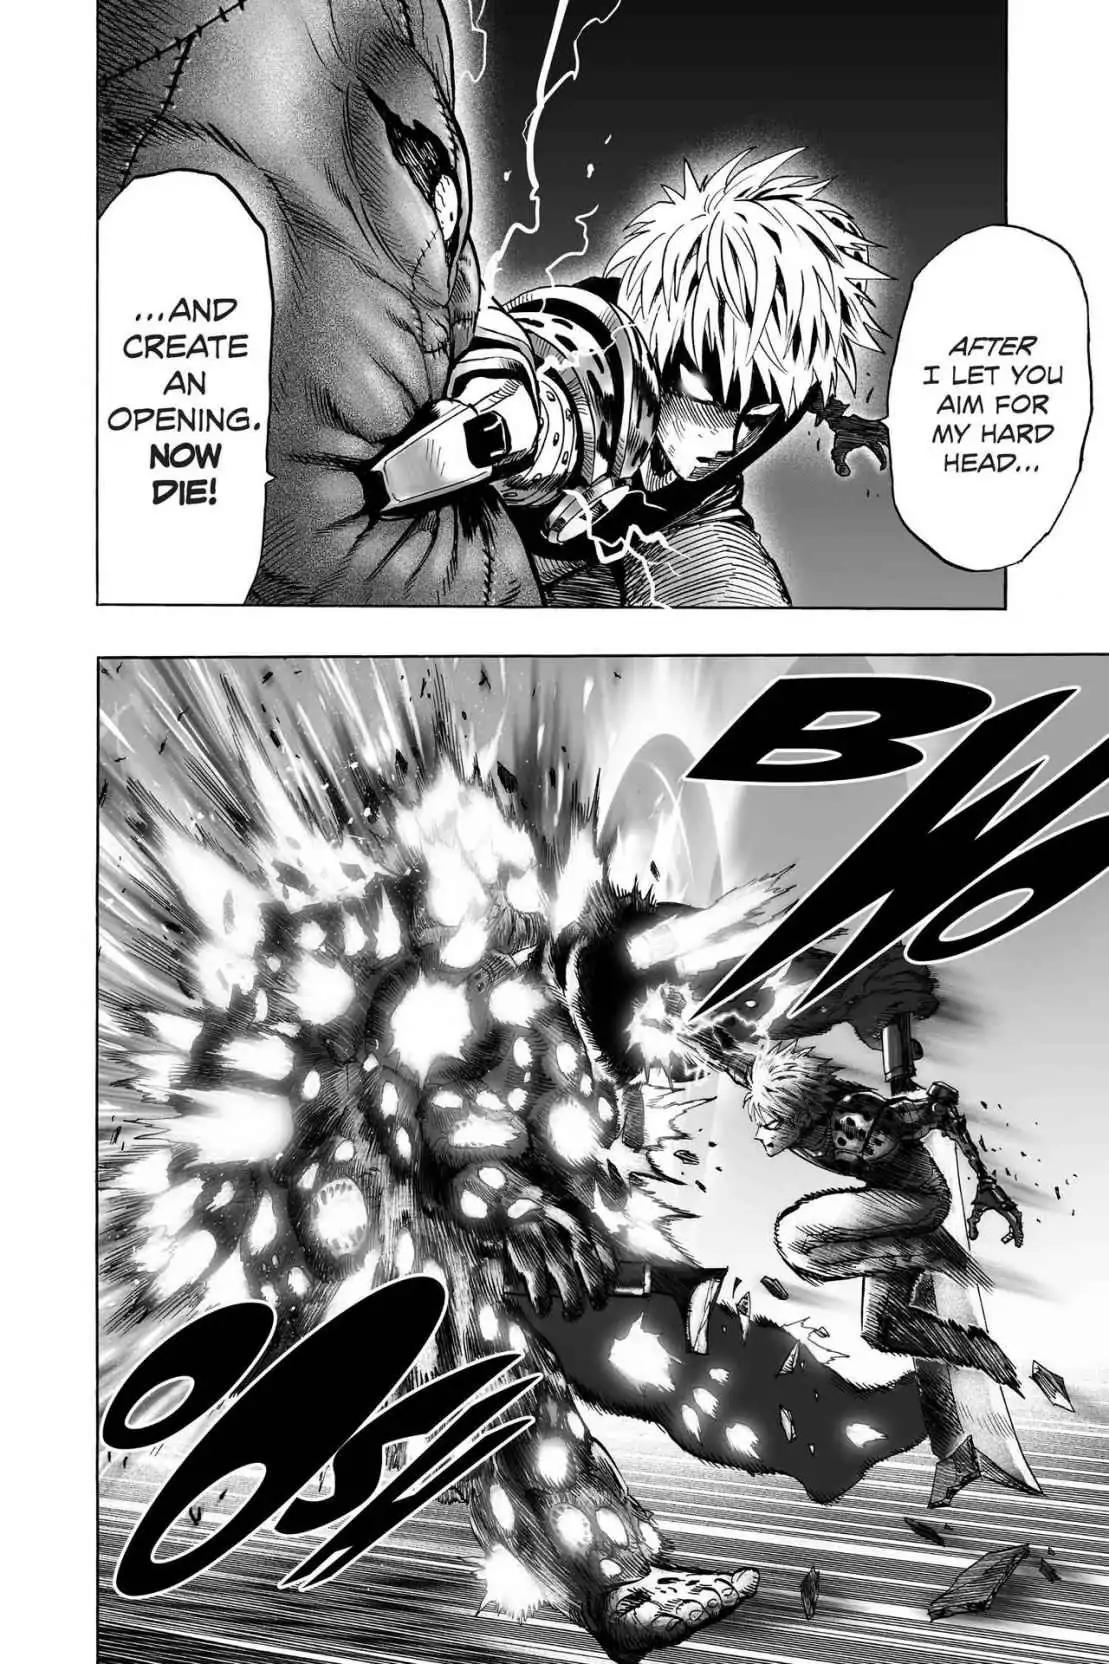 One-Punch Man chapter 63 page 30